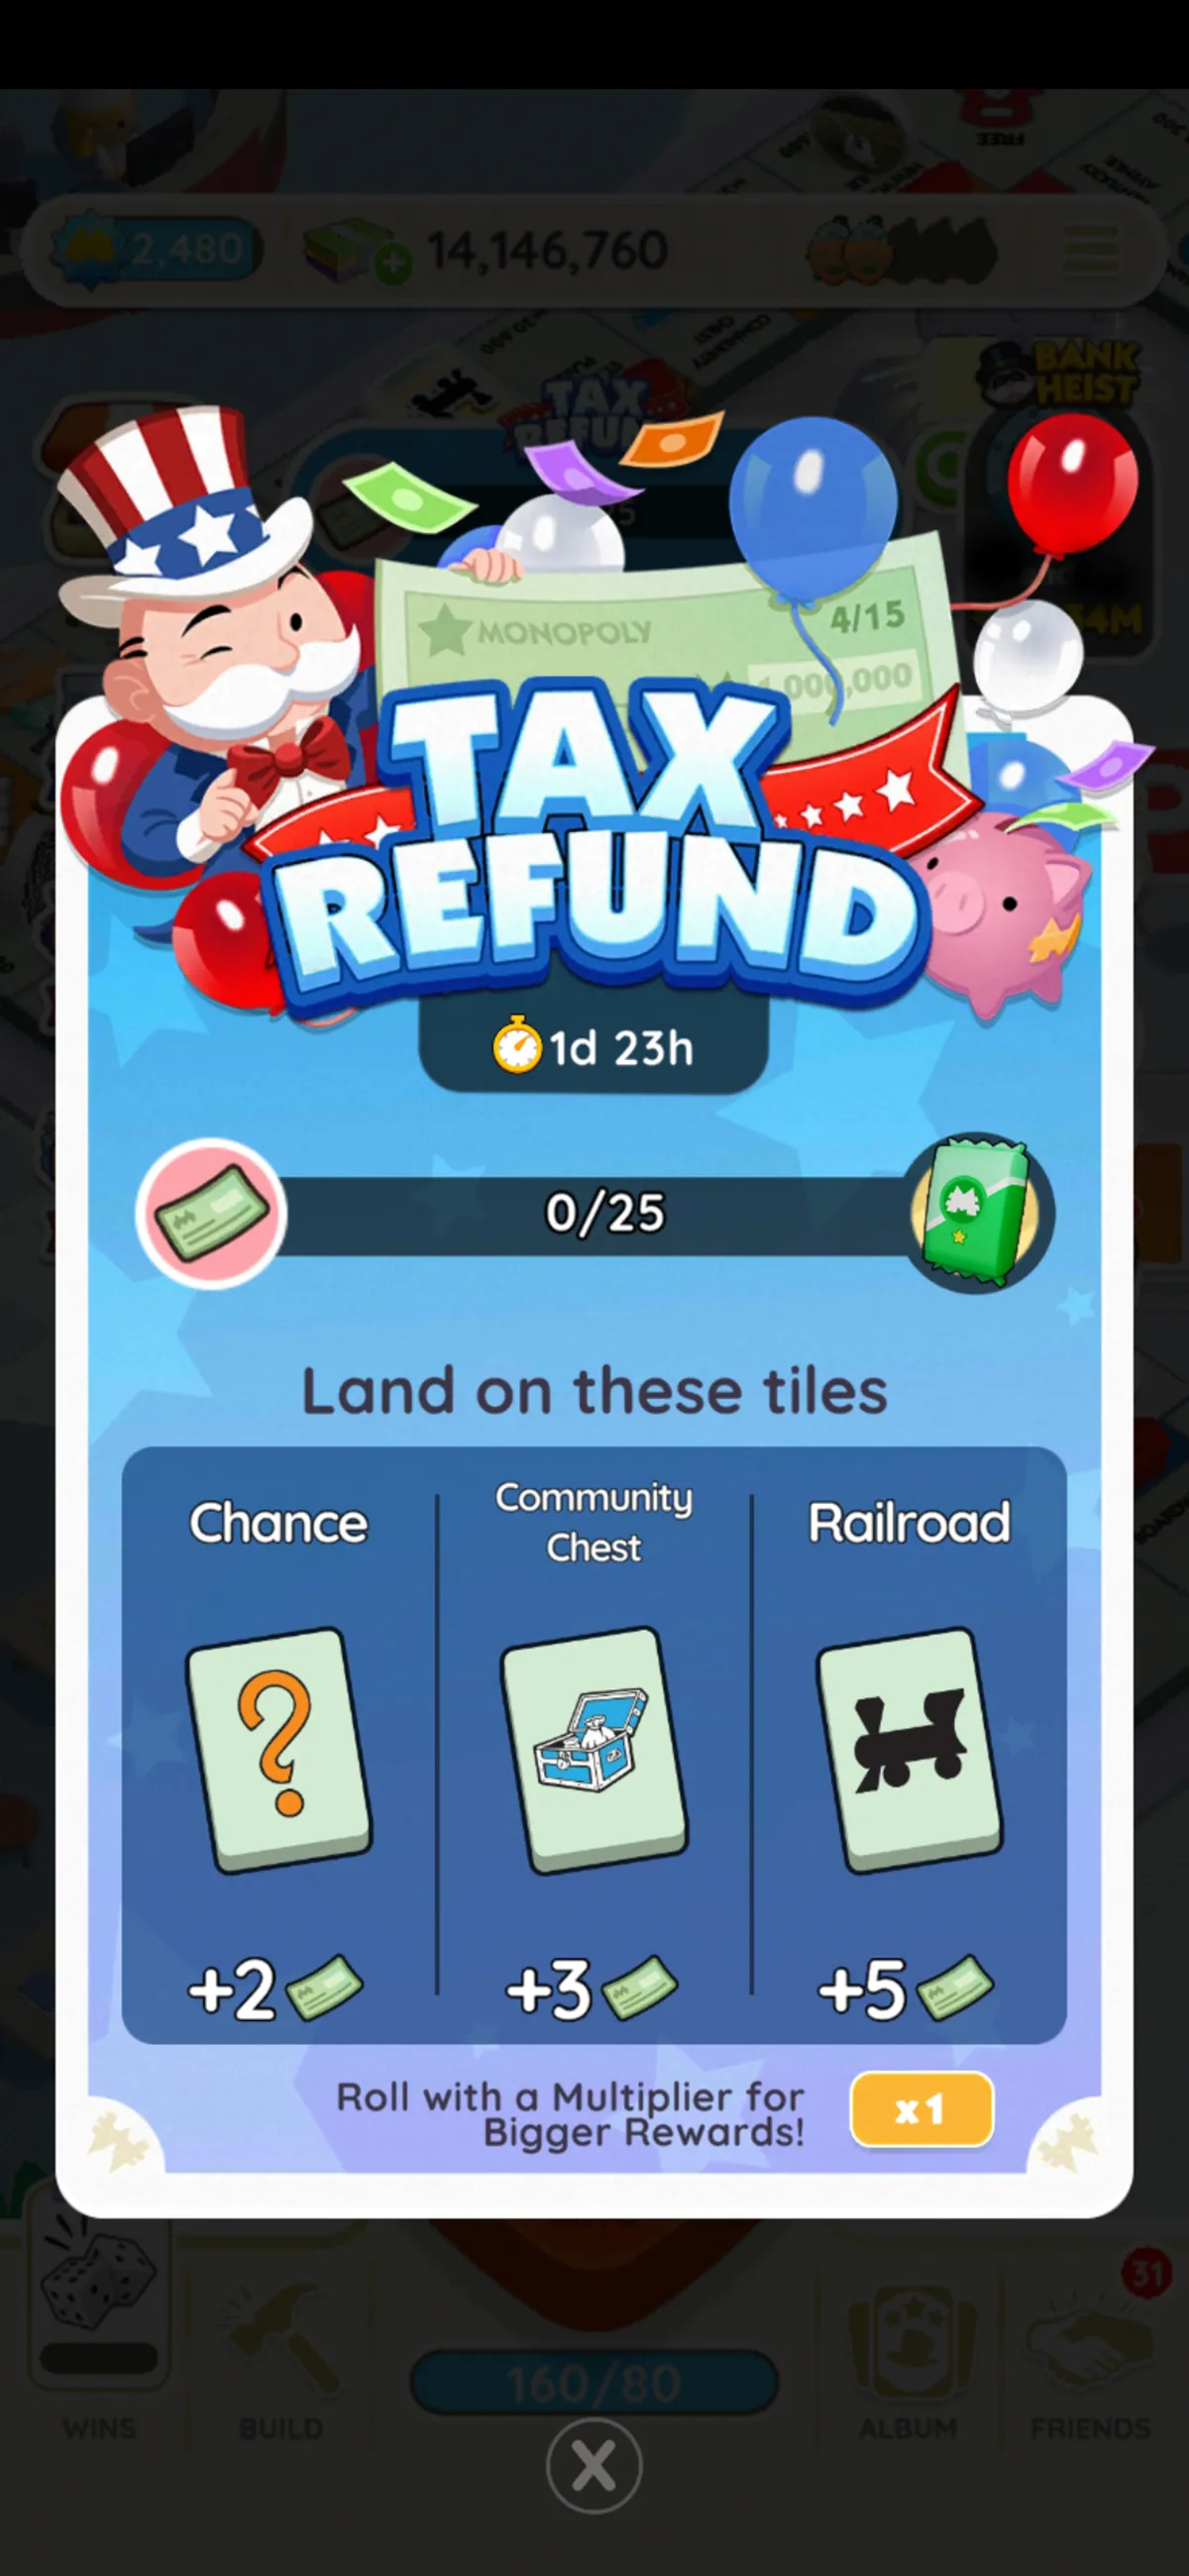 An image for the Tax Refund event showing Rich Uncle Pennybags dressed up as Uncle Sam and holding a giant check. The image is part of an article on the Tax Refund event in Monopoly GO on all the rewards, milestones, and prizes you can get for the event as well as how to play and win.